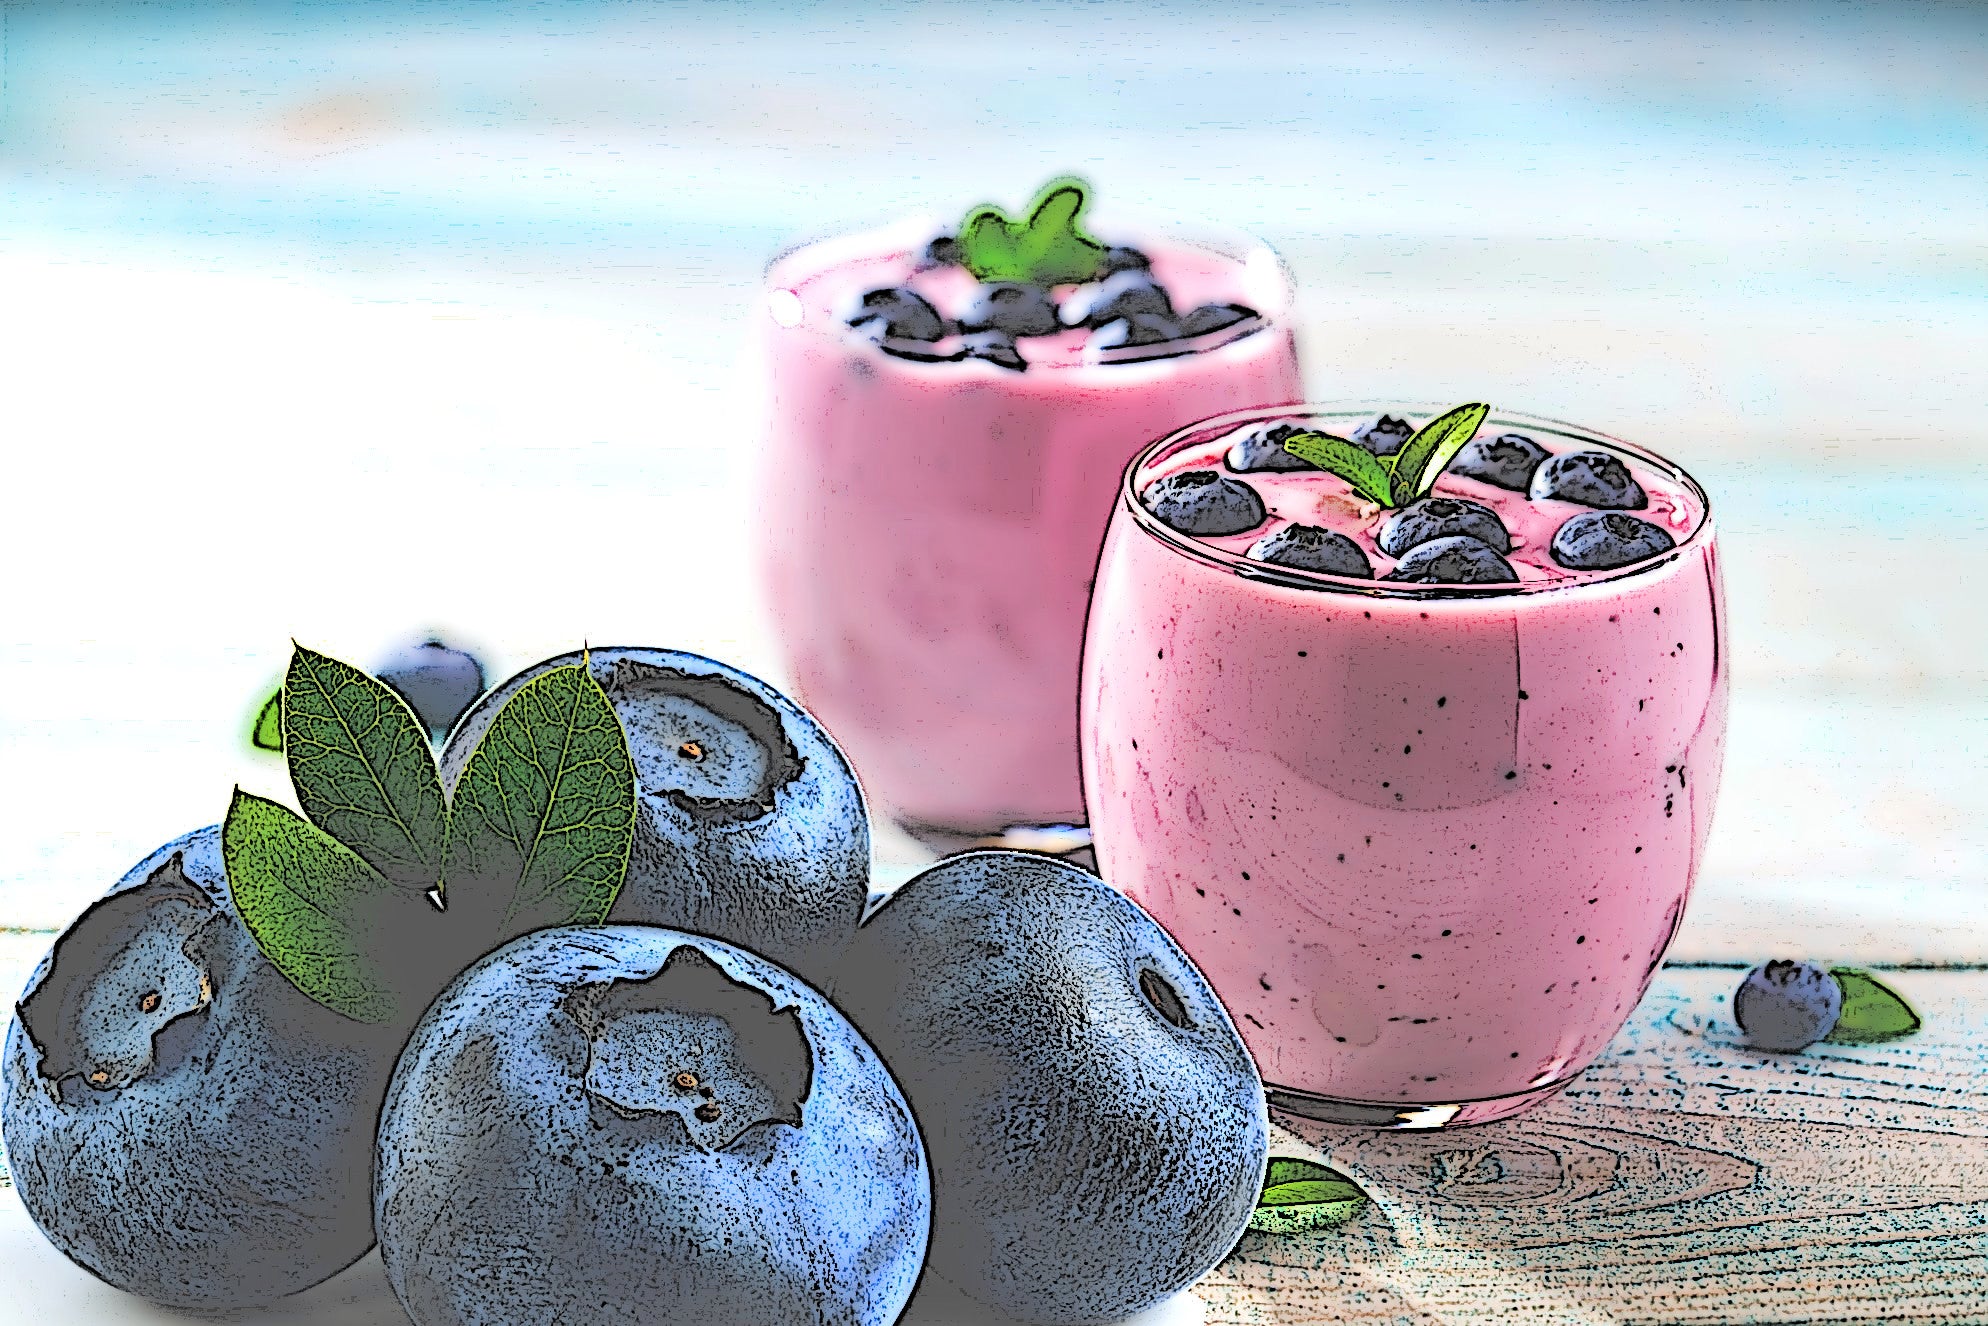 Introducing Blueberry Fields